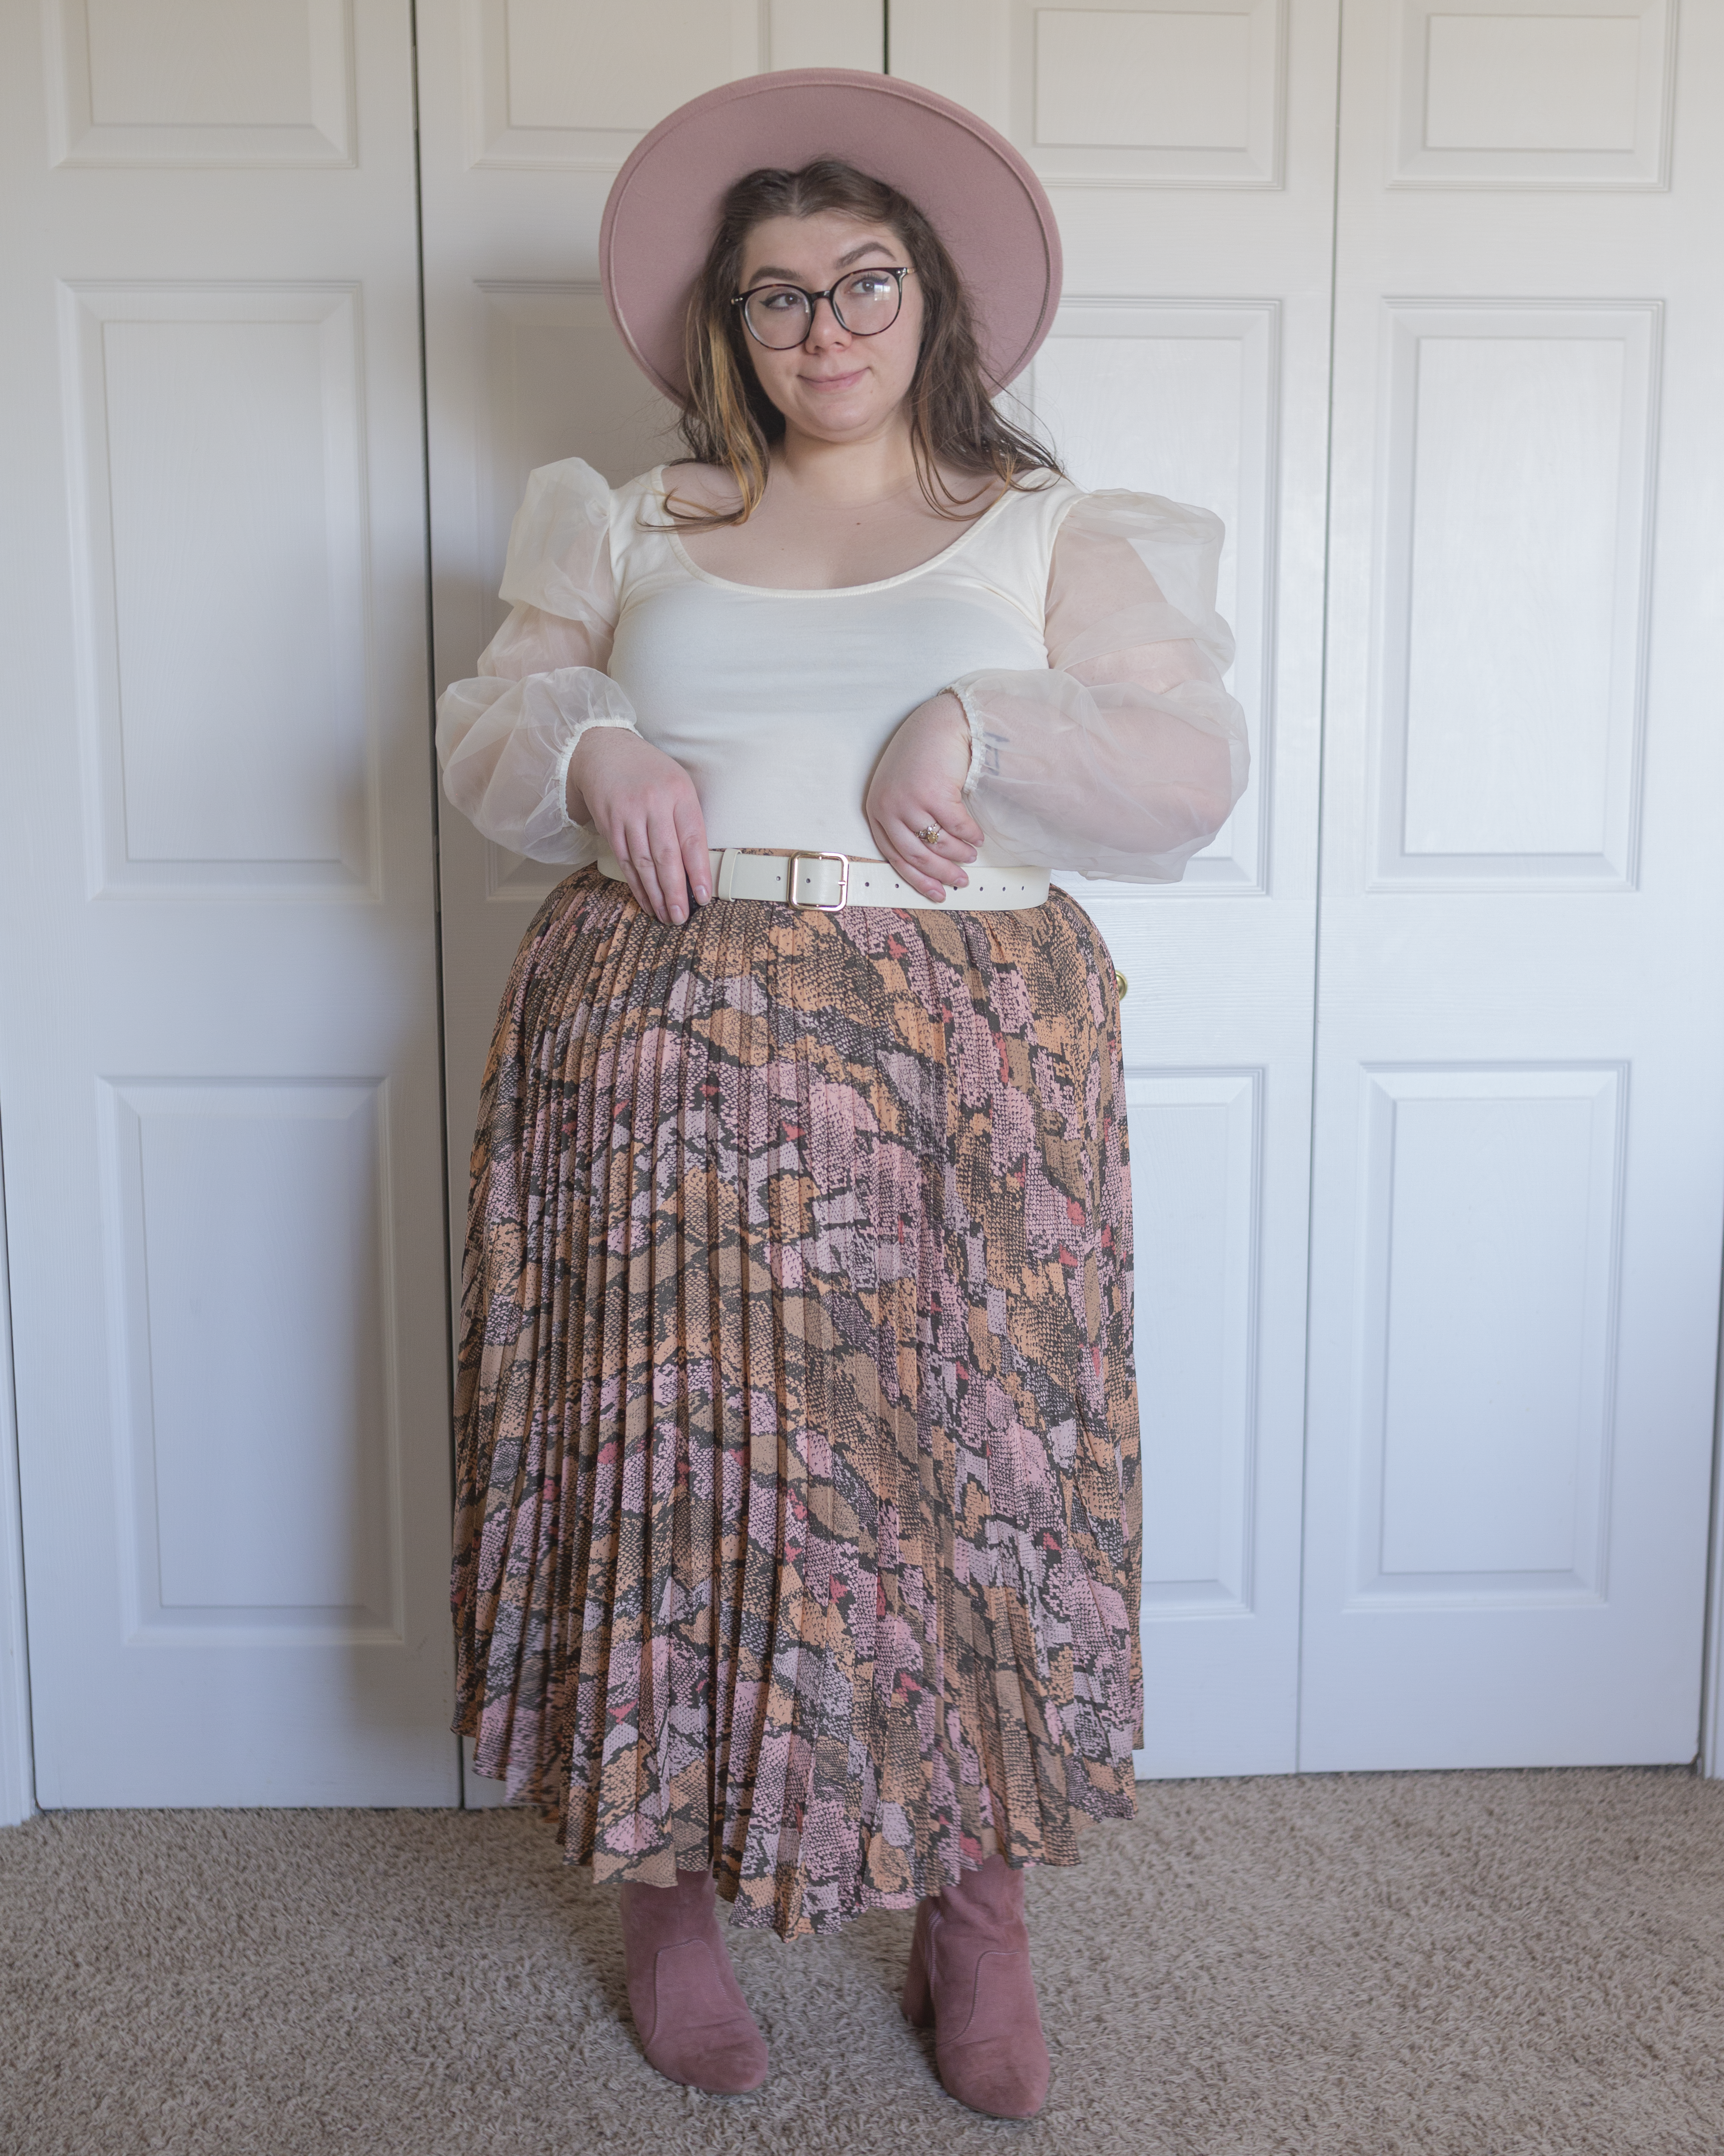 An outfit consisting of a pastel pink wide brim fedora, a cream colored wide scoop neck blouse with long sheer balloon sleeves tucked into a pastel pink, orange, brown and gray snake print accordion pleated midi skirt and pastel pink suede midi boots.